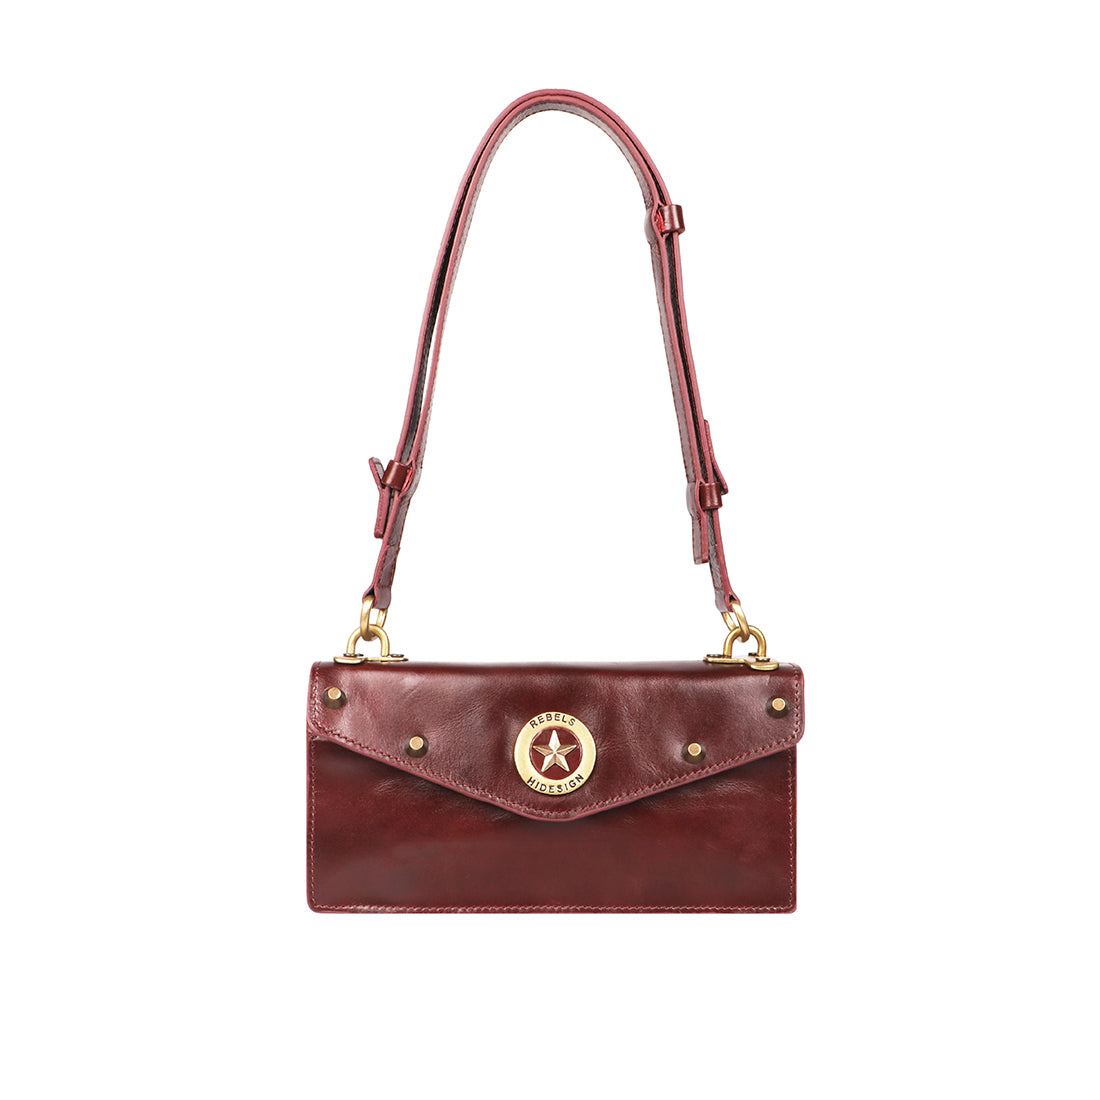 Buy Isle Locada by Hidesign Women's Shoulder bag (Berry) at Amazon.in